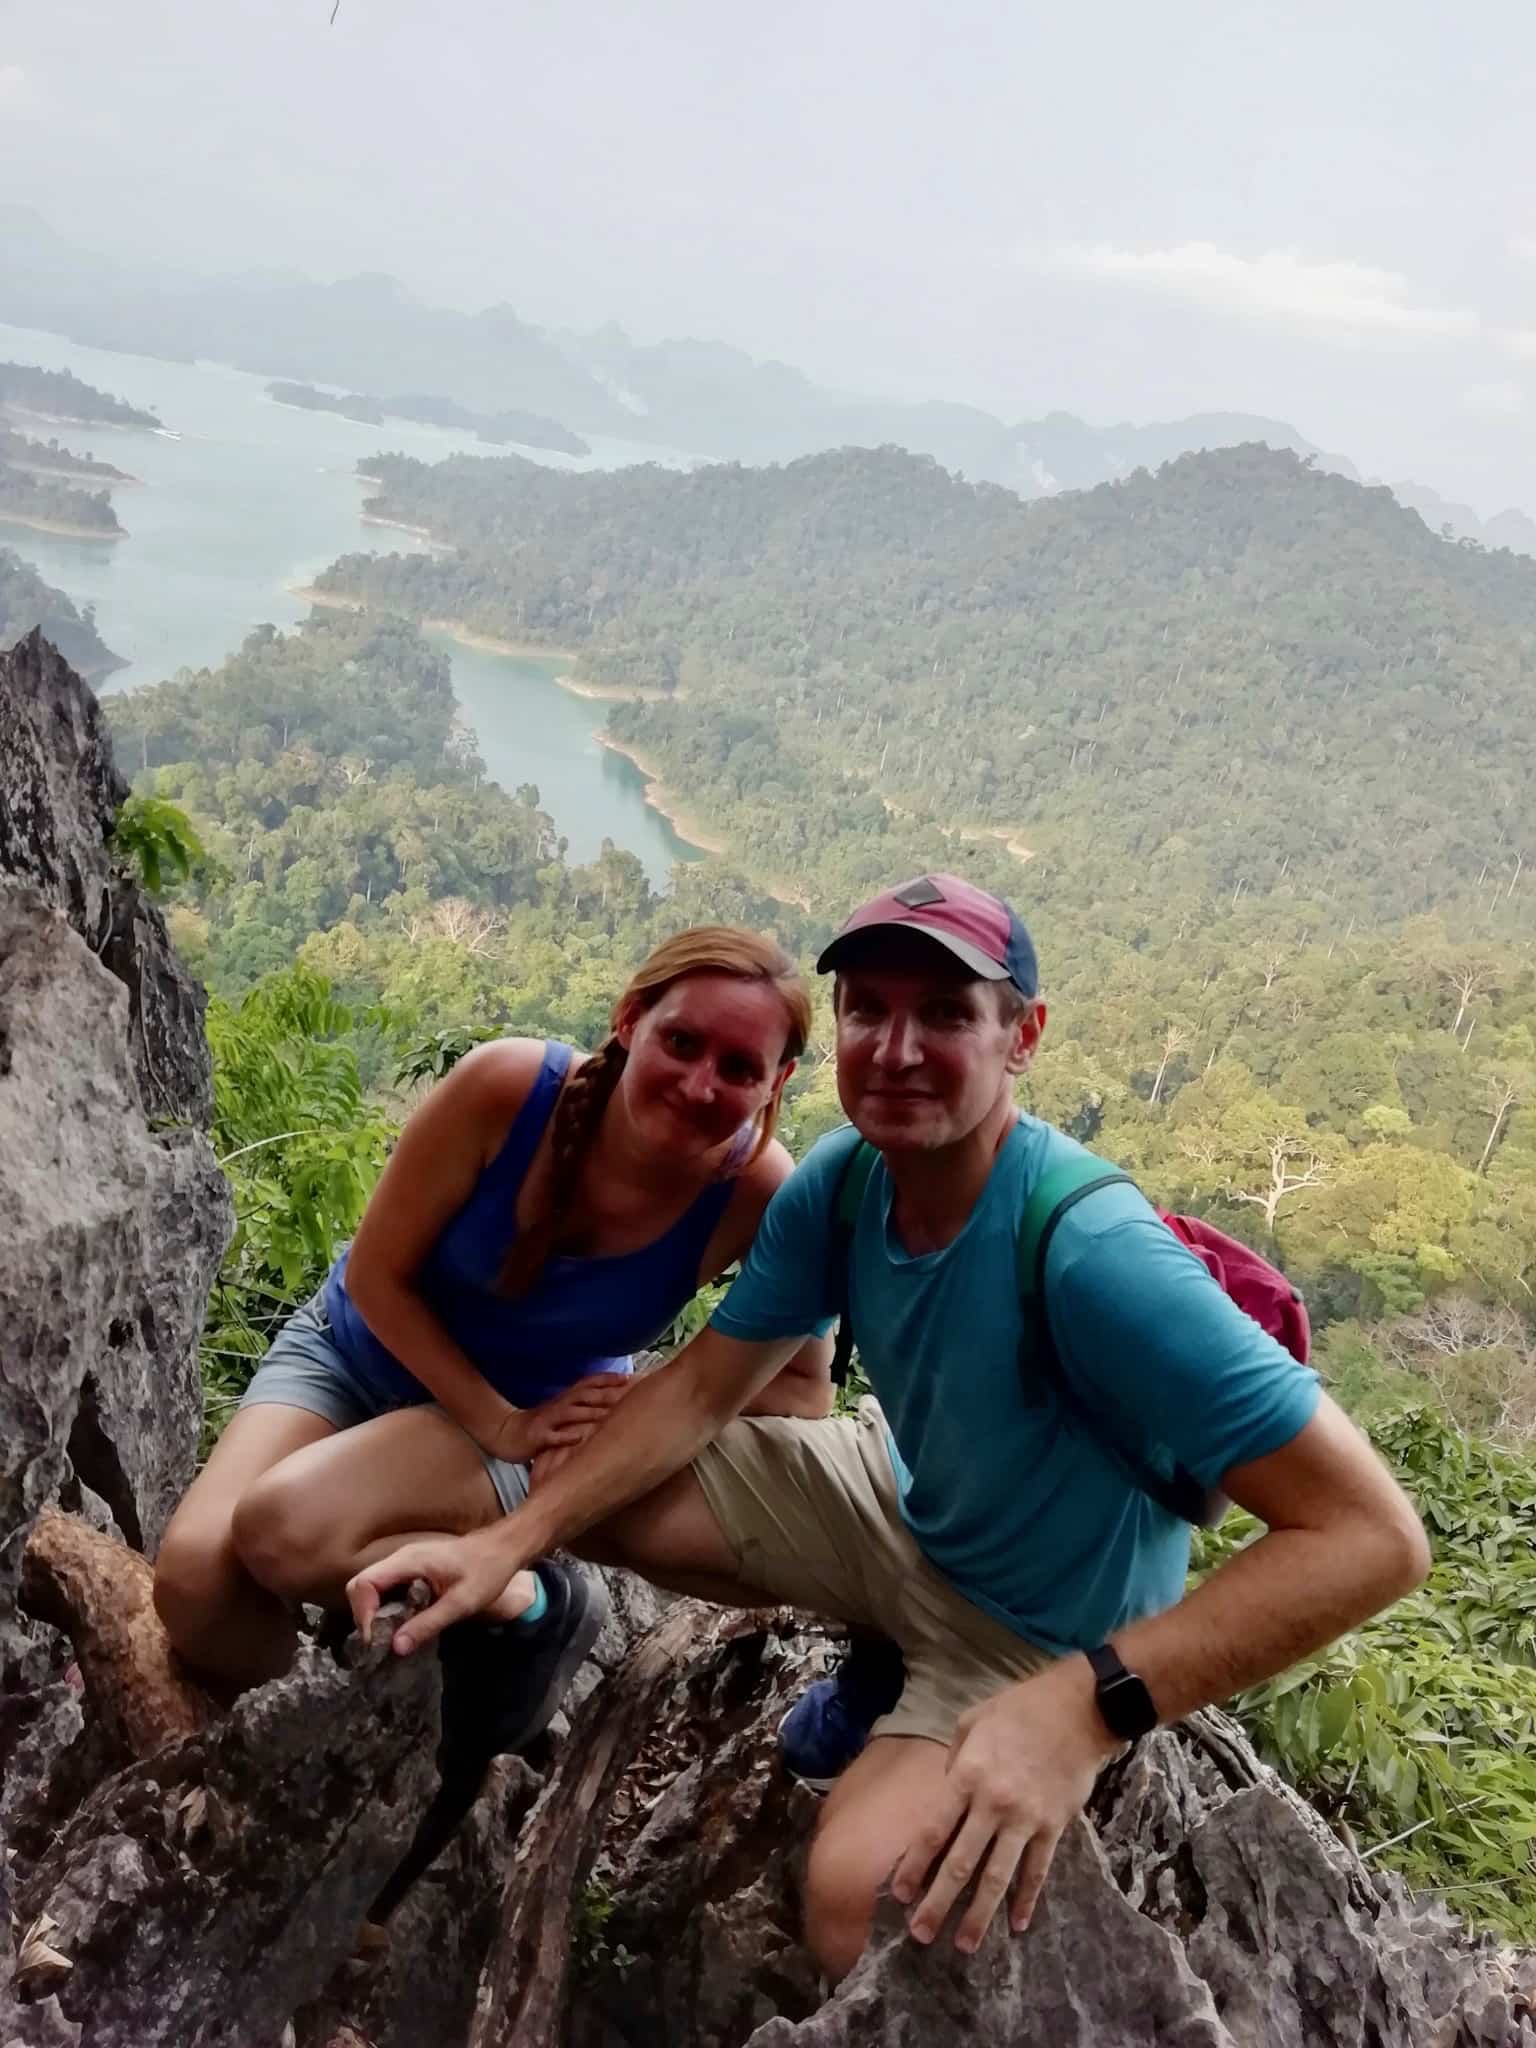 Hiking to a view point in Khao Sok National Park